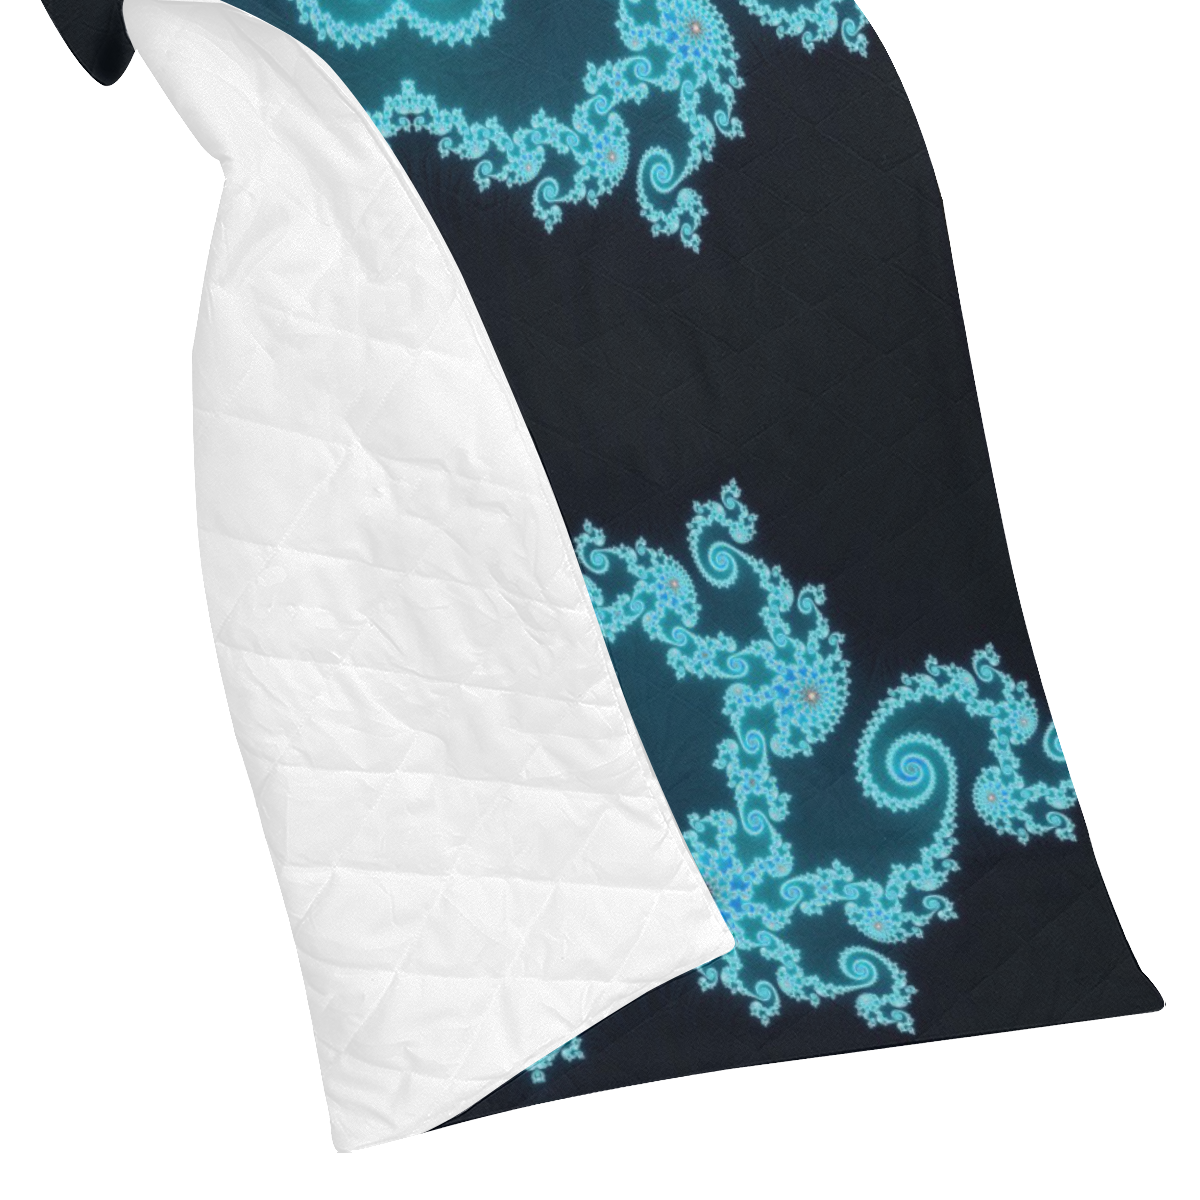 Sky Blue and Black Hearts Lace Fractal Abstract Quilt 70"x80"